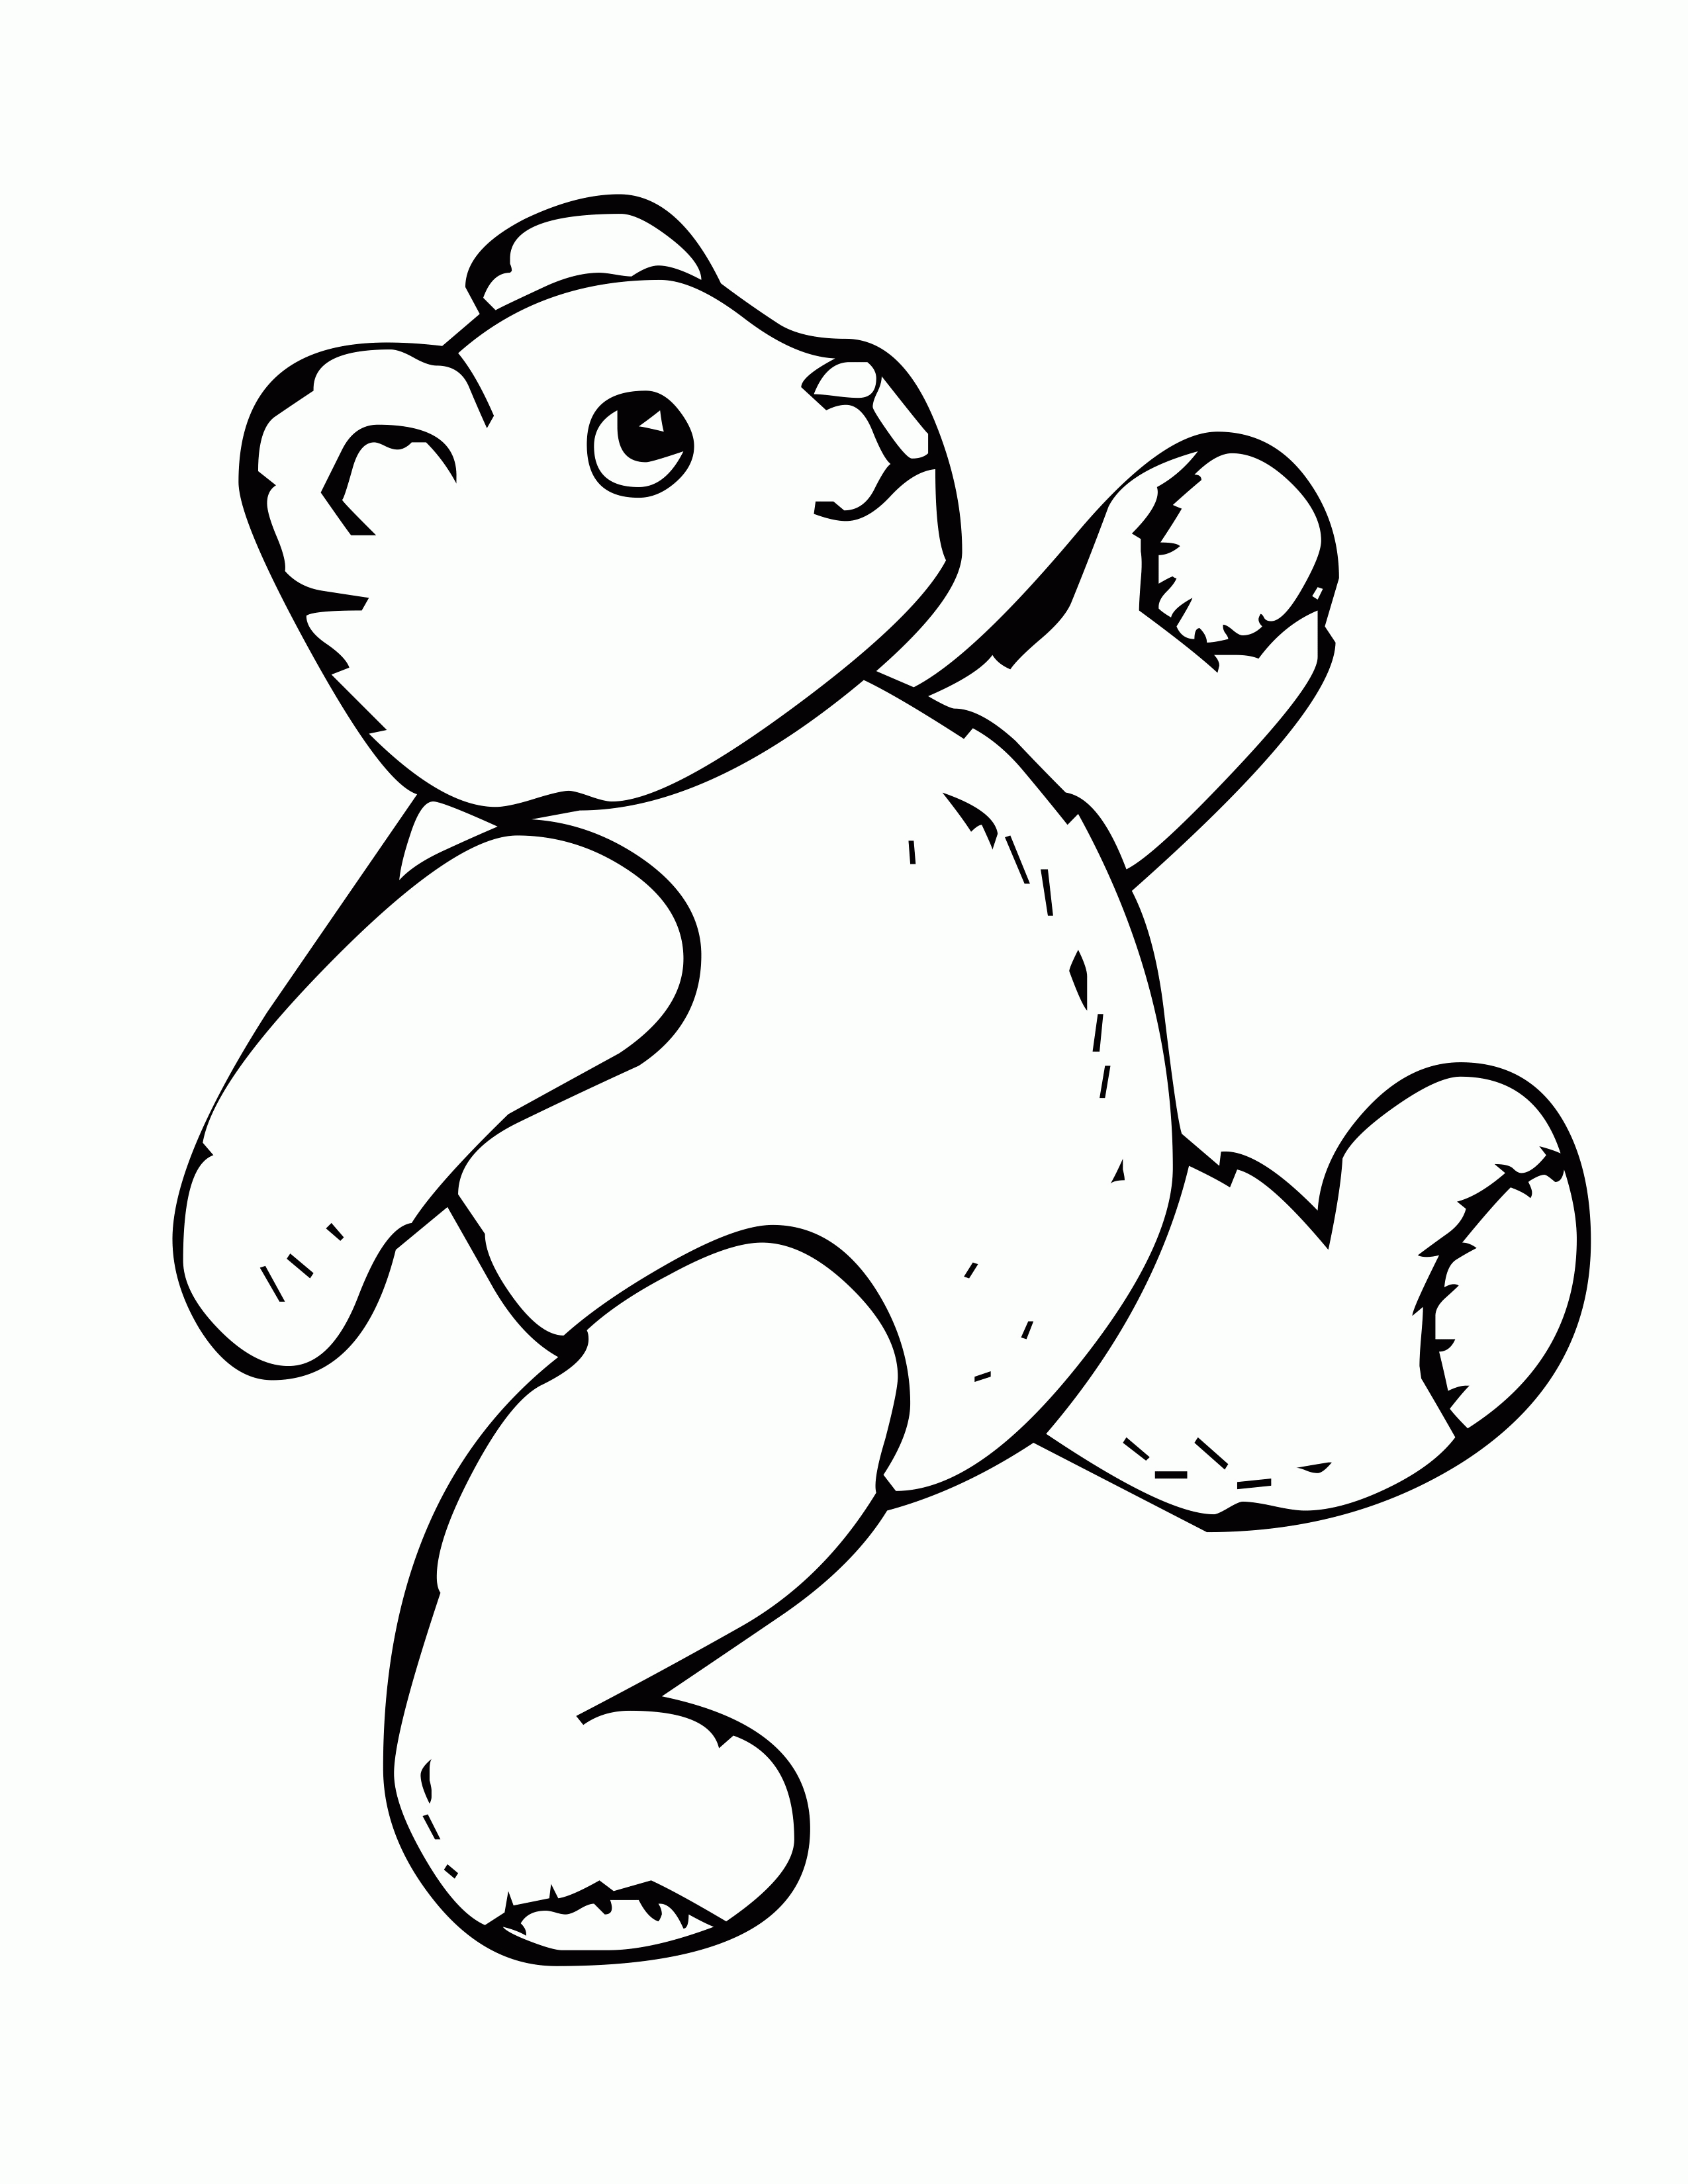 Free Teddy Bear Coloring Pages Print - Coloring Page